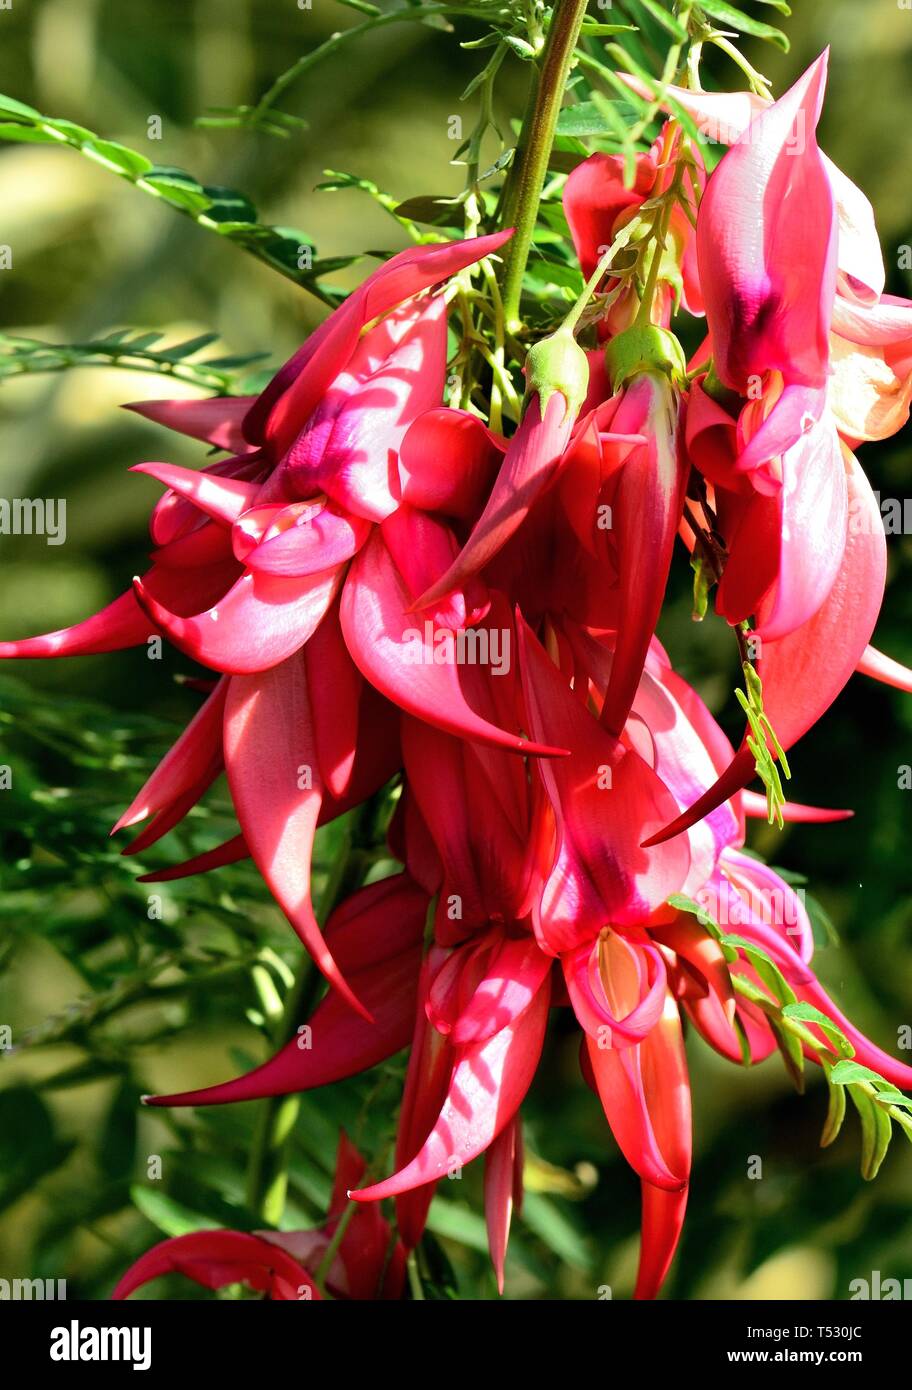 Red flowers of the Lobster Claw plant. Stock Photo